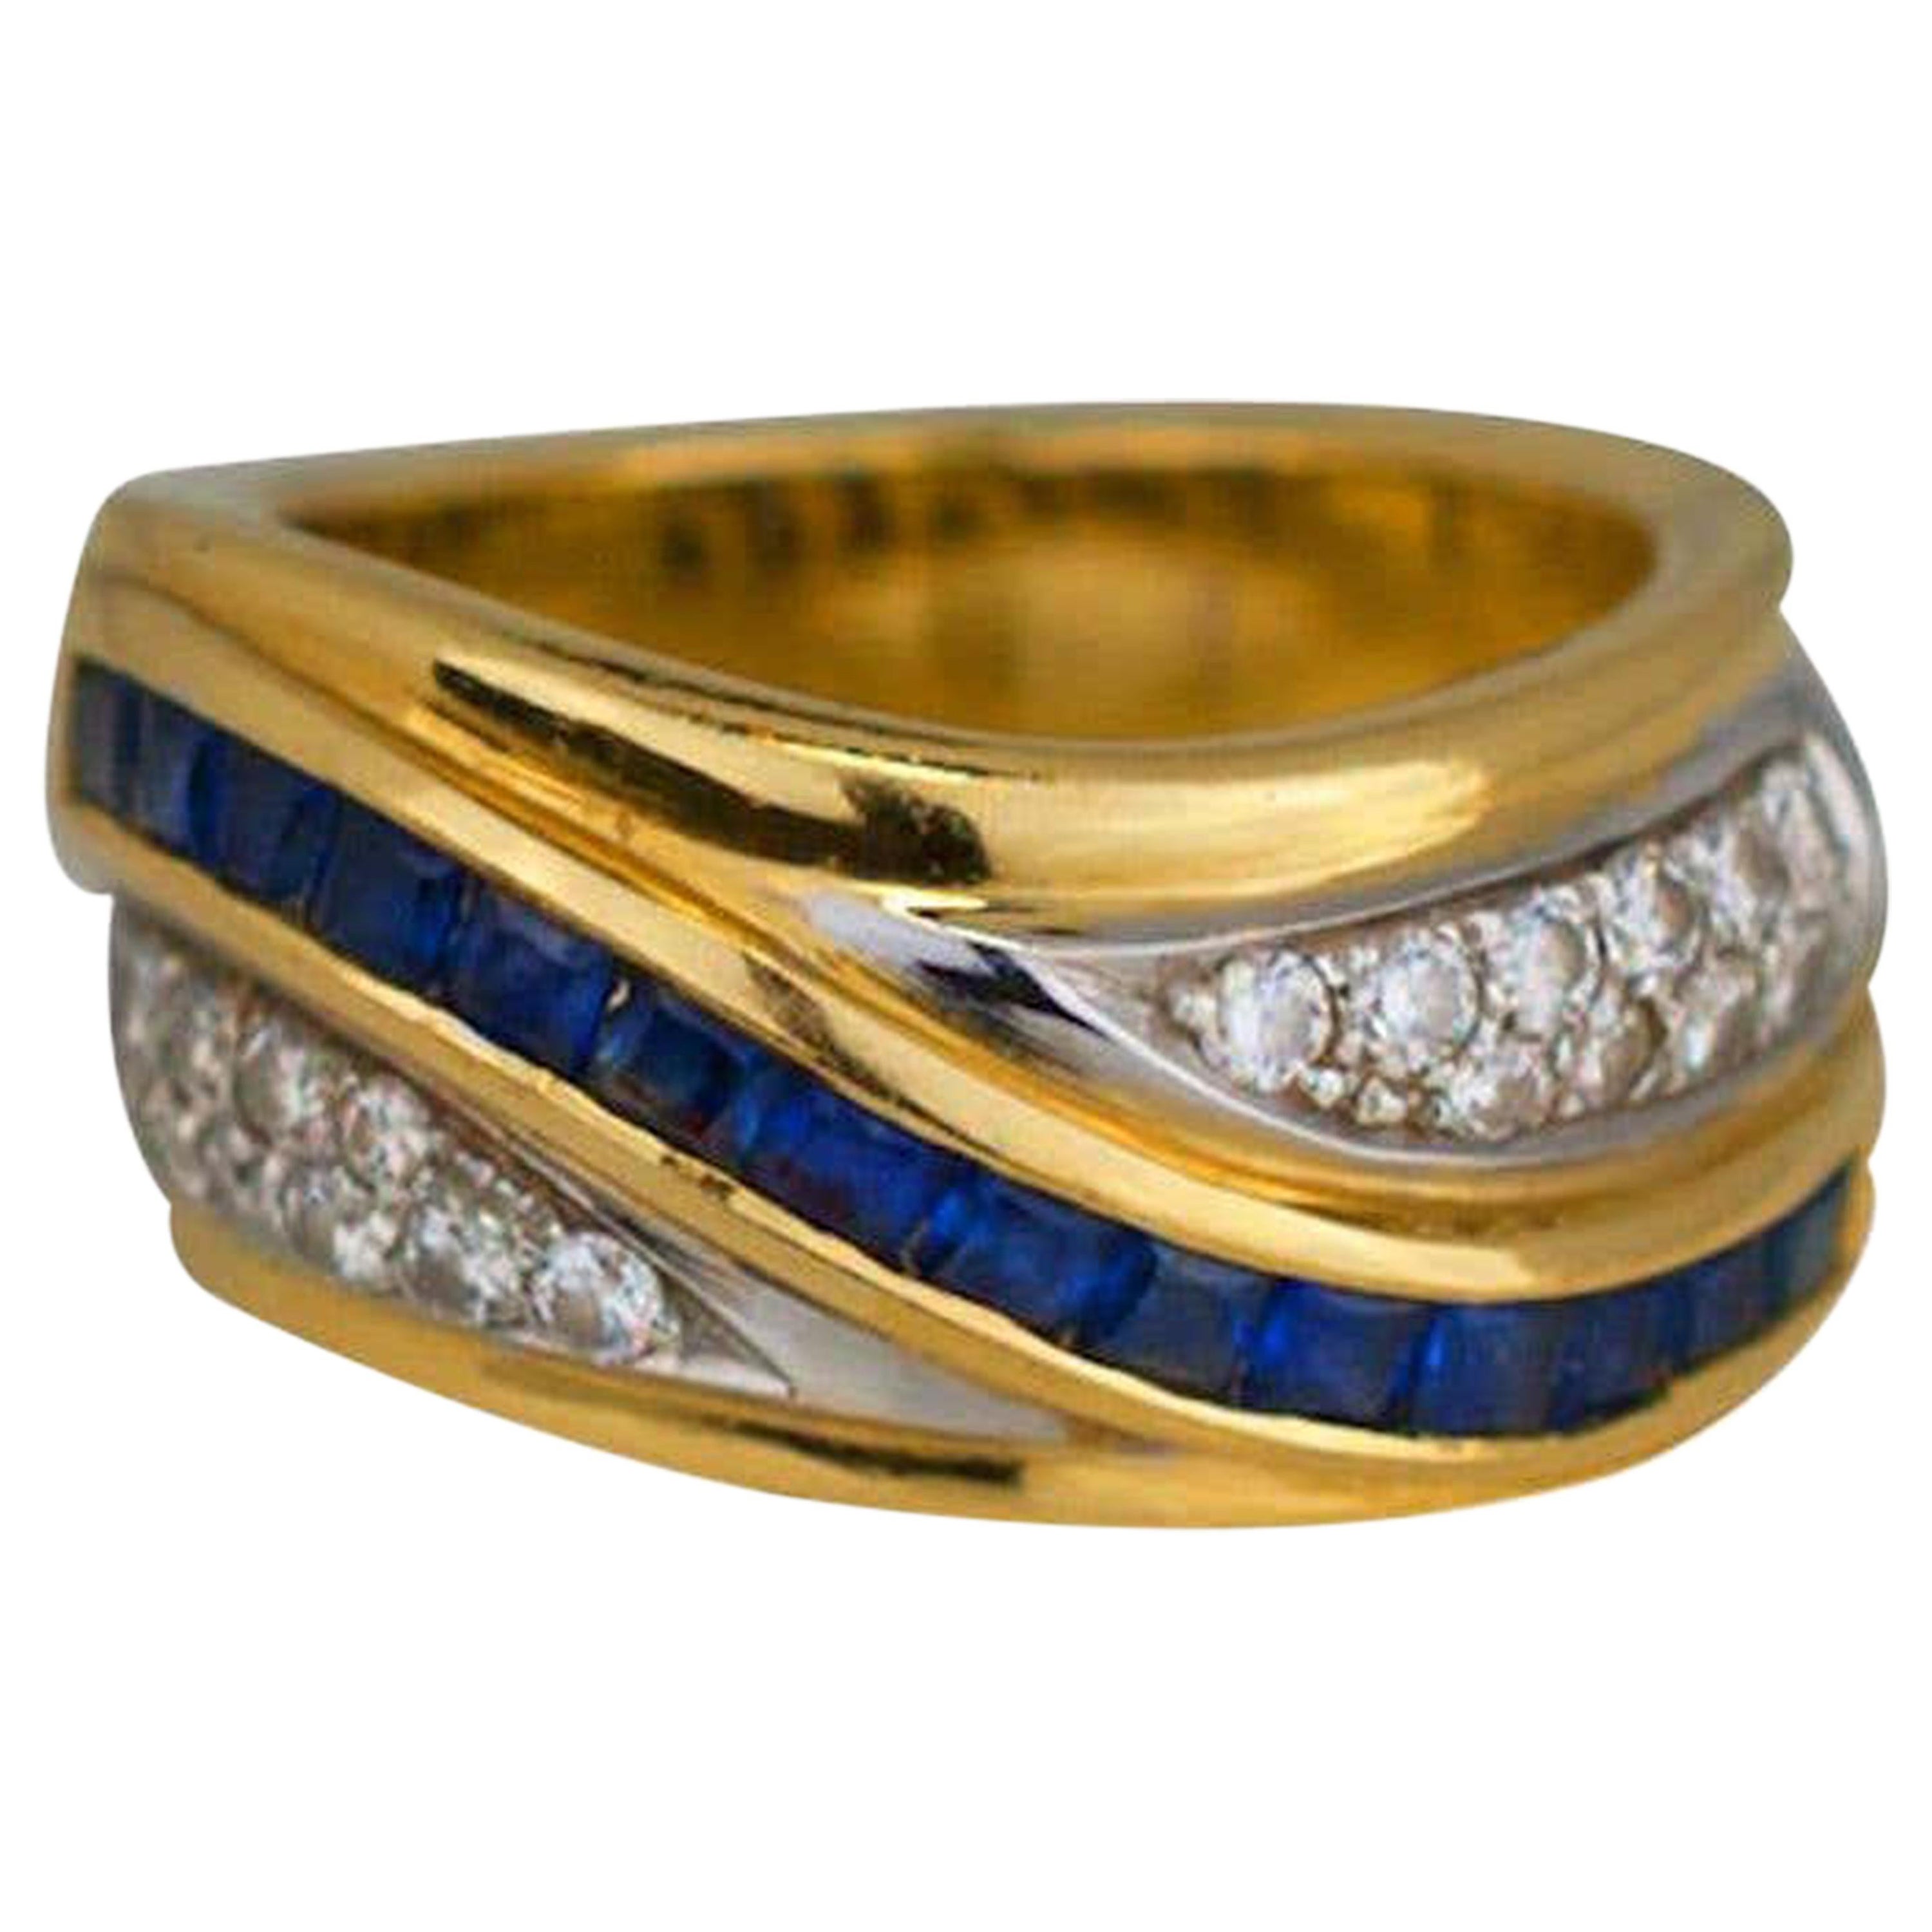 1.70 Carat Sapphire and Diamond Band Ring Channel Princess